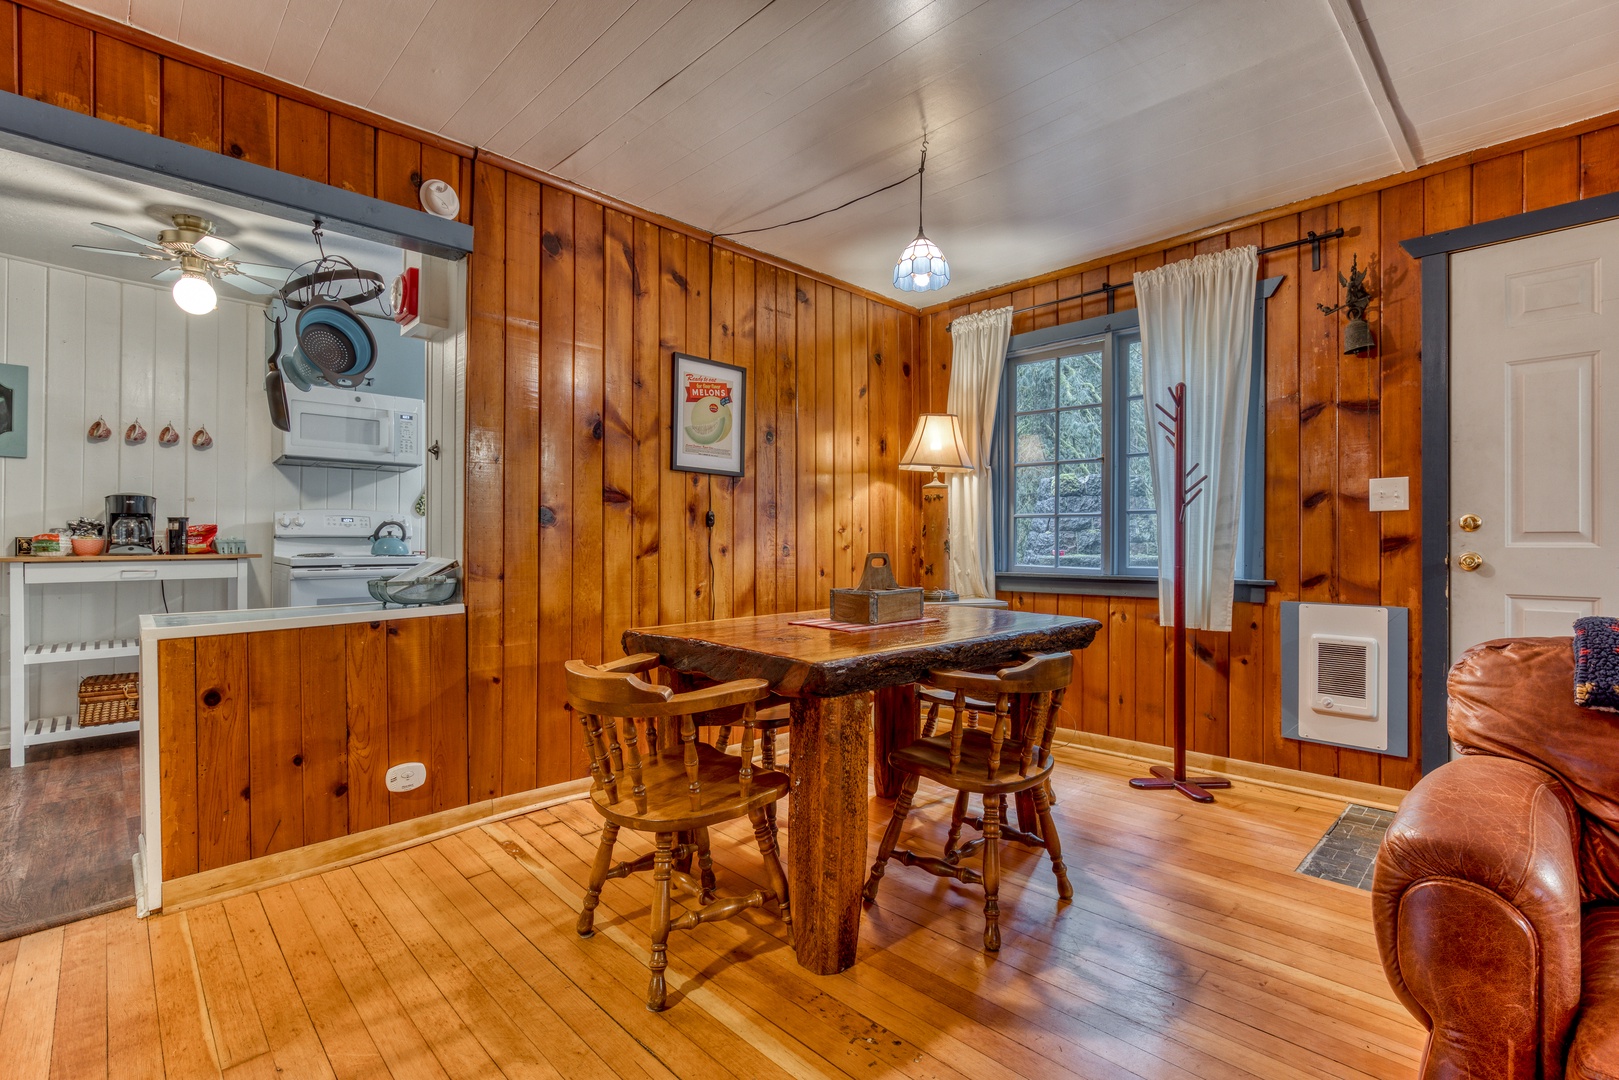 Brightwood Vacation Rentals, Springbrook Cabin - Enjoy your delicious meals at the custom-made heavy wood dining table for four guests.